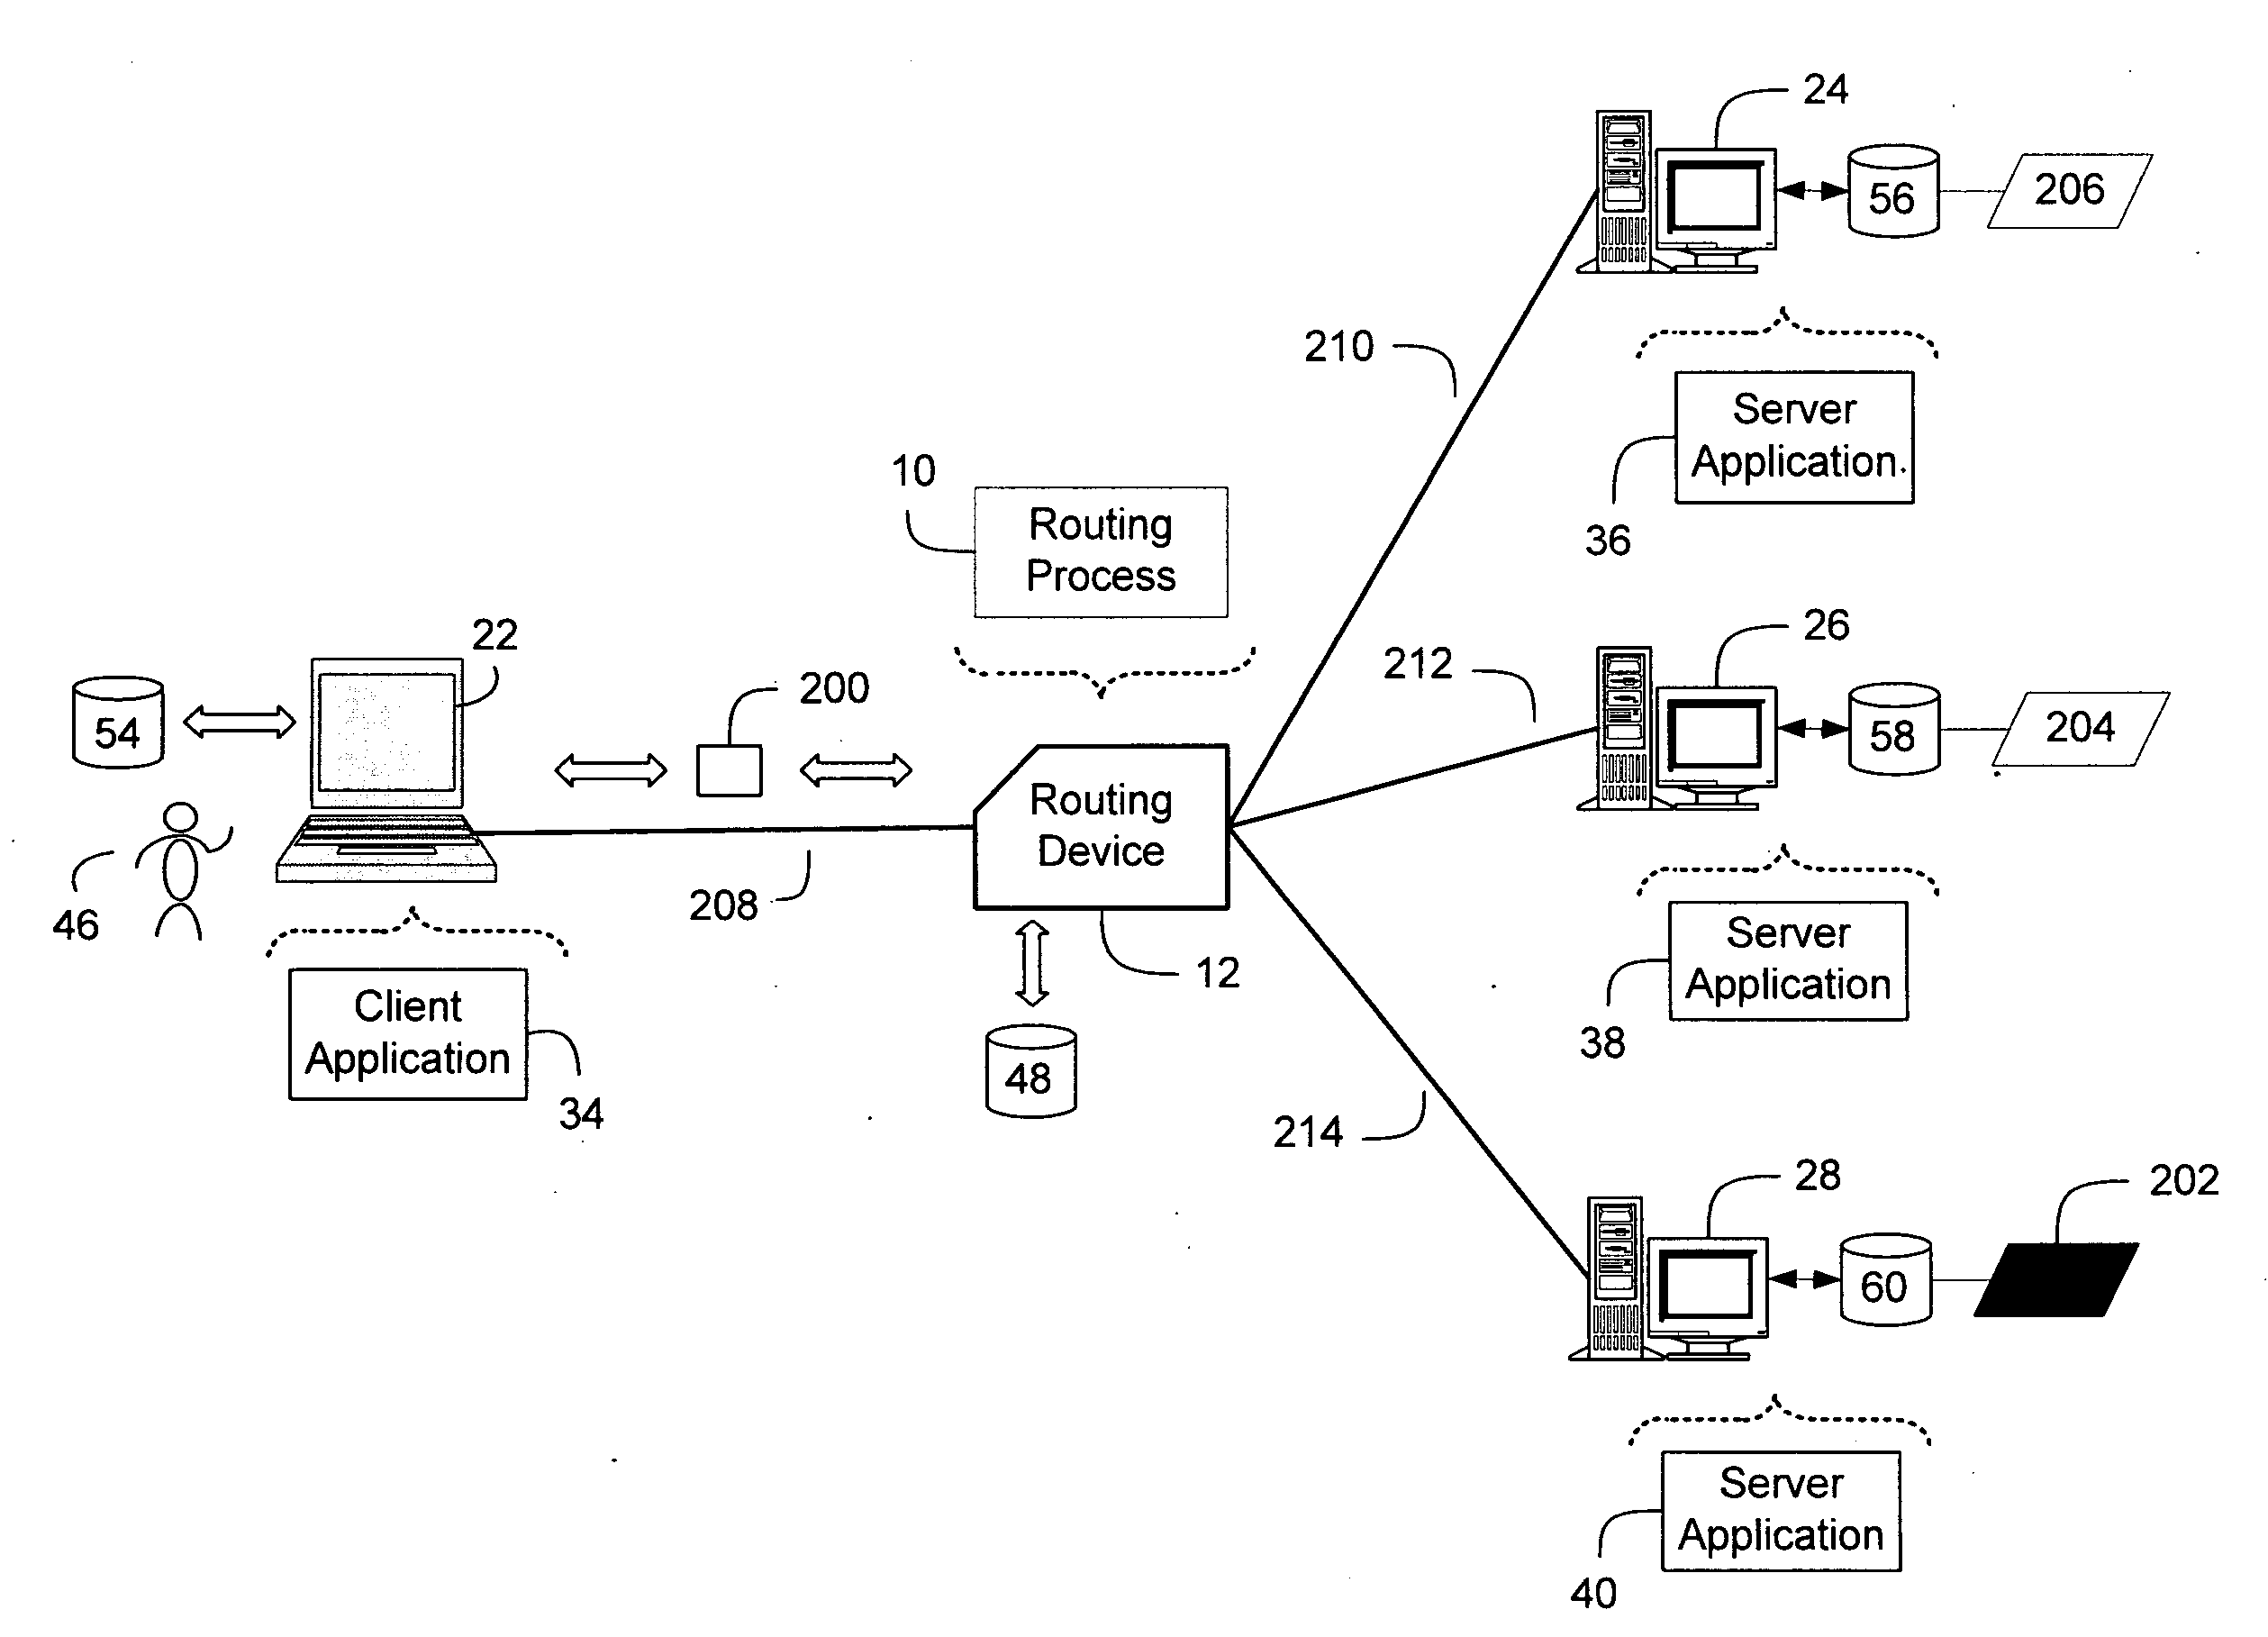 Method and system for content-based routing of network traffic